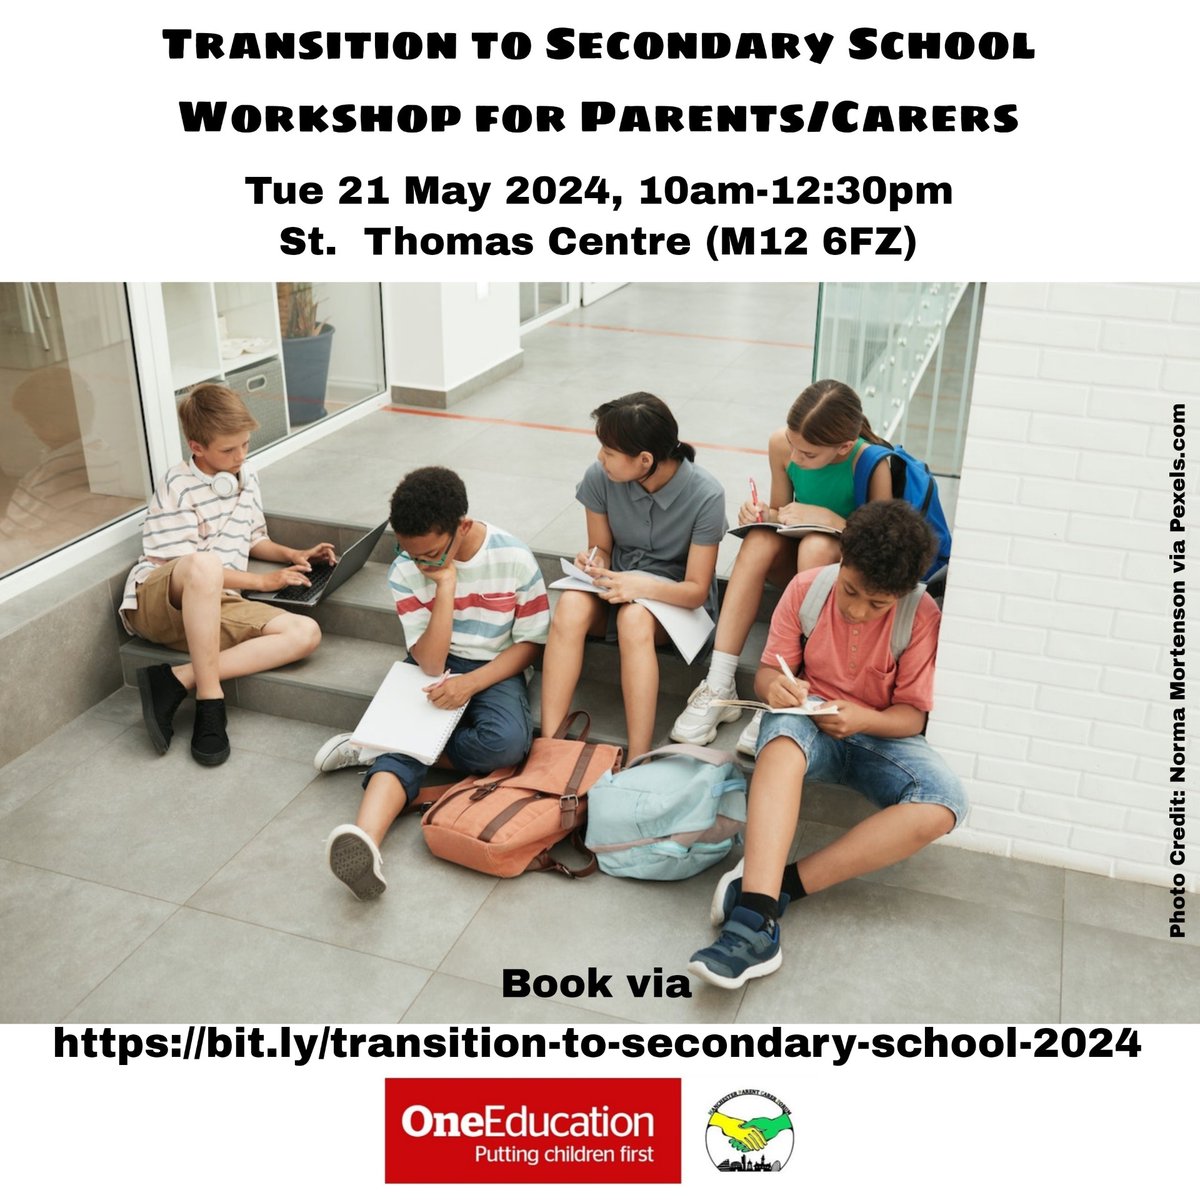 Free Transition to Secondary School workshop for parents/carers of children with #SEND in Years 4, 5 and 6, Tuesday 21st May 10am-12.30pm, St Thomas Centre, M12 6FZ. With @ManchesterMpcf and @OneEducation. Find out more and book. 👇👇👇 manchesterparentcarerforum.org.uk/event/transiti…